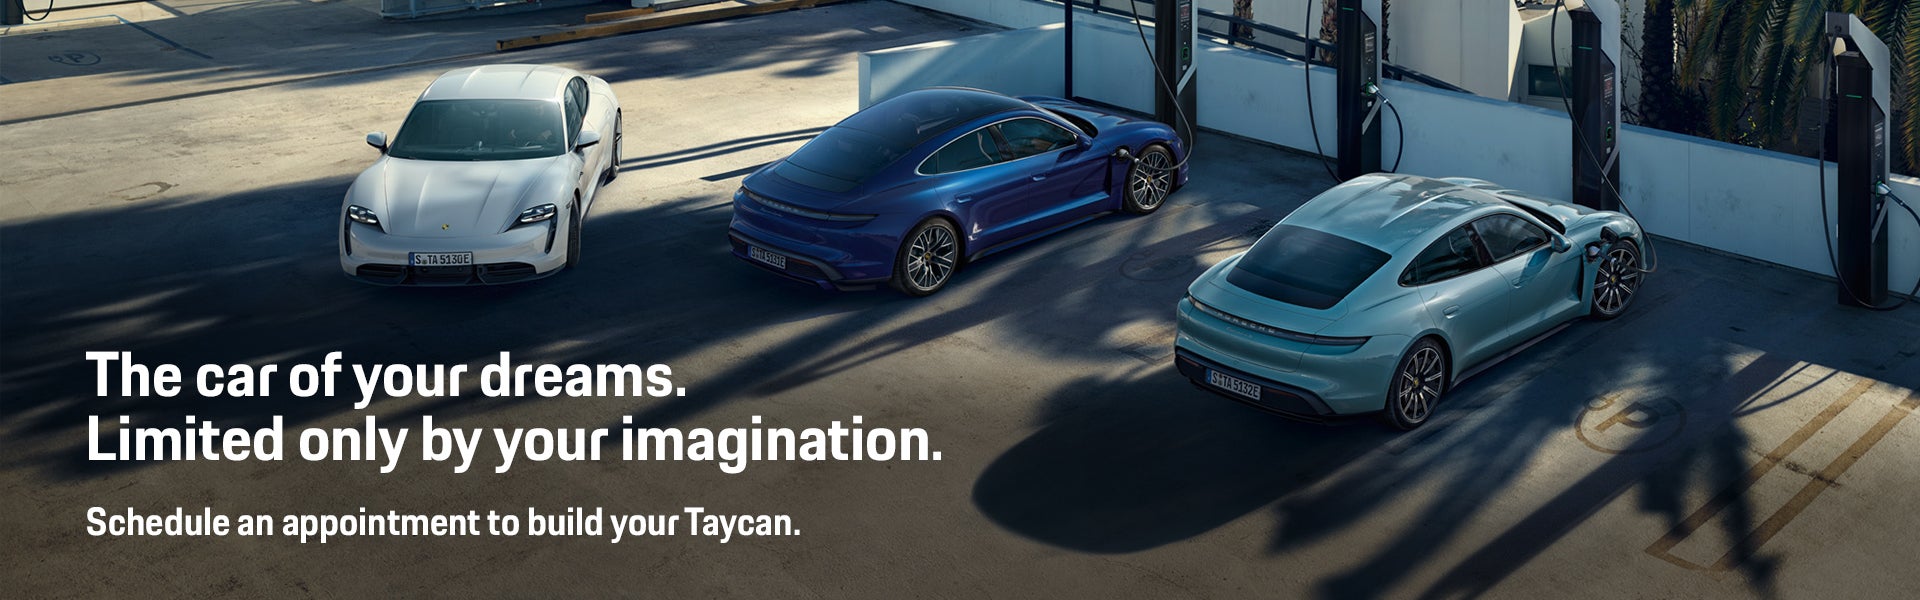 Schedule an appointment to build your Taycan.